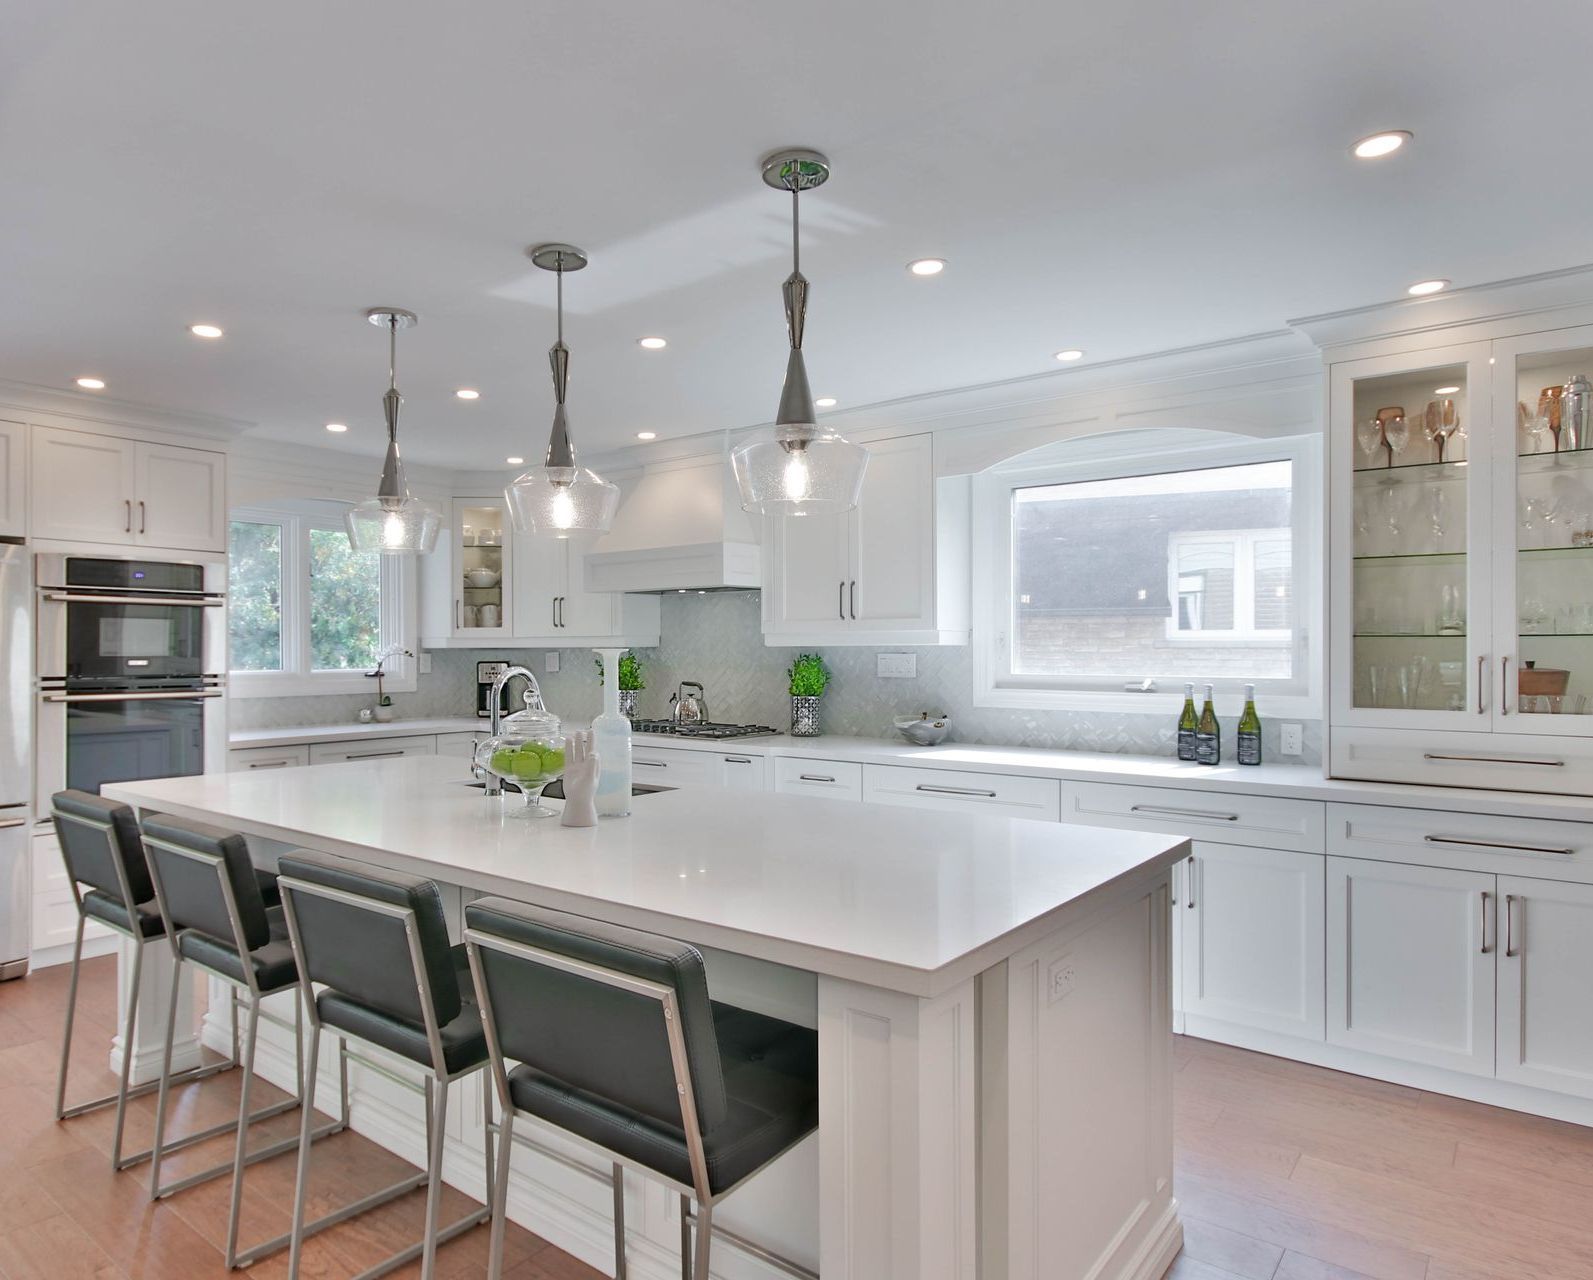 Bay Area Kitchen Remodel Cost | remodeled kitchen in SF Bay Area